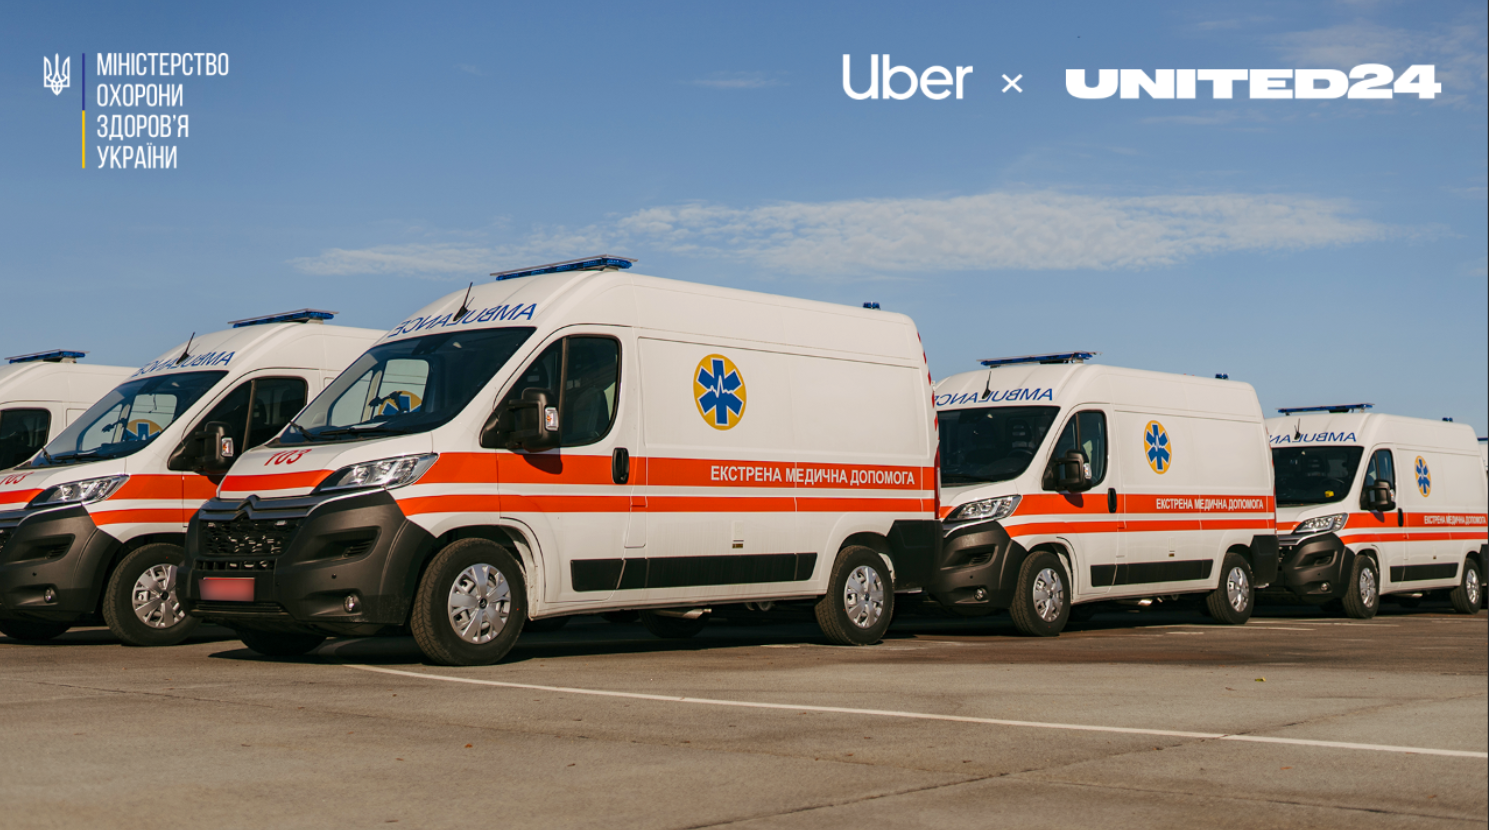 UNITED24 Partners with Uber to Launch an International Fundraising Campaign for Life-Saving Ambulances